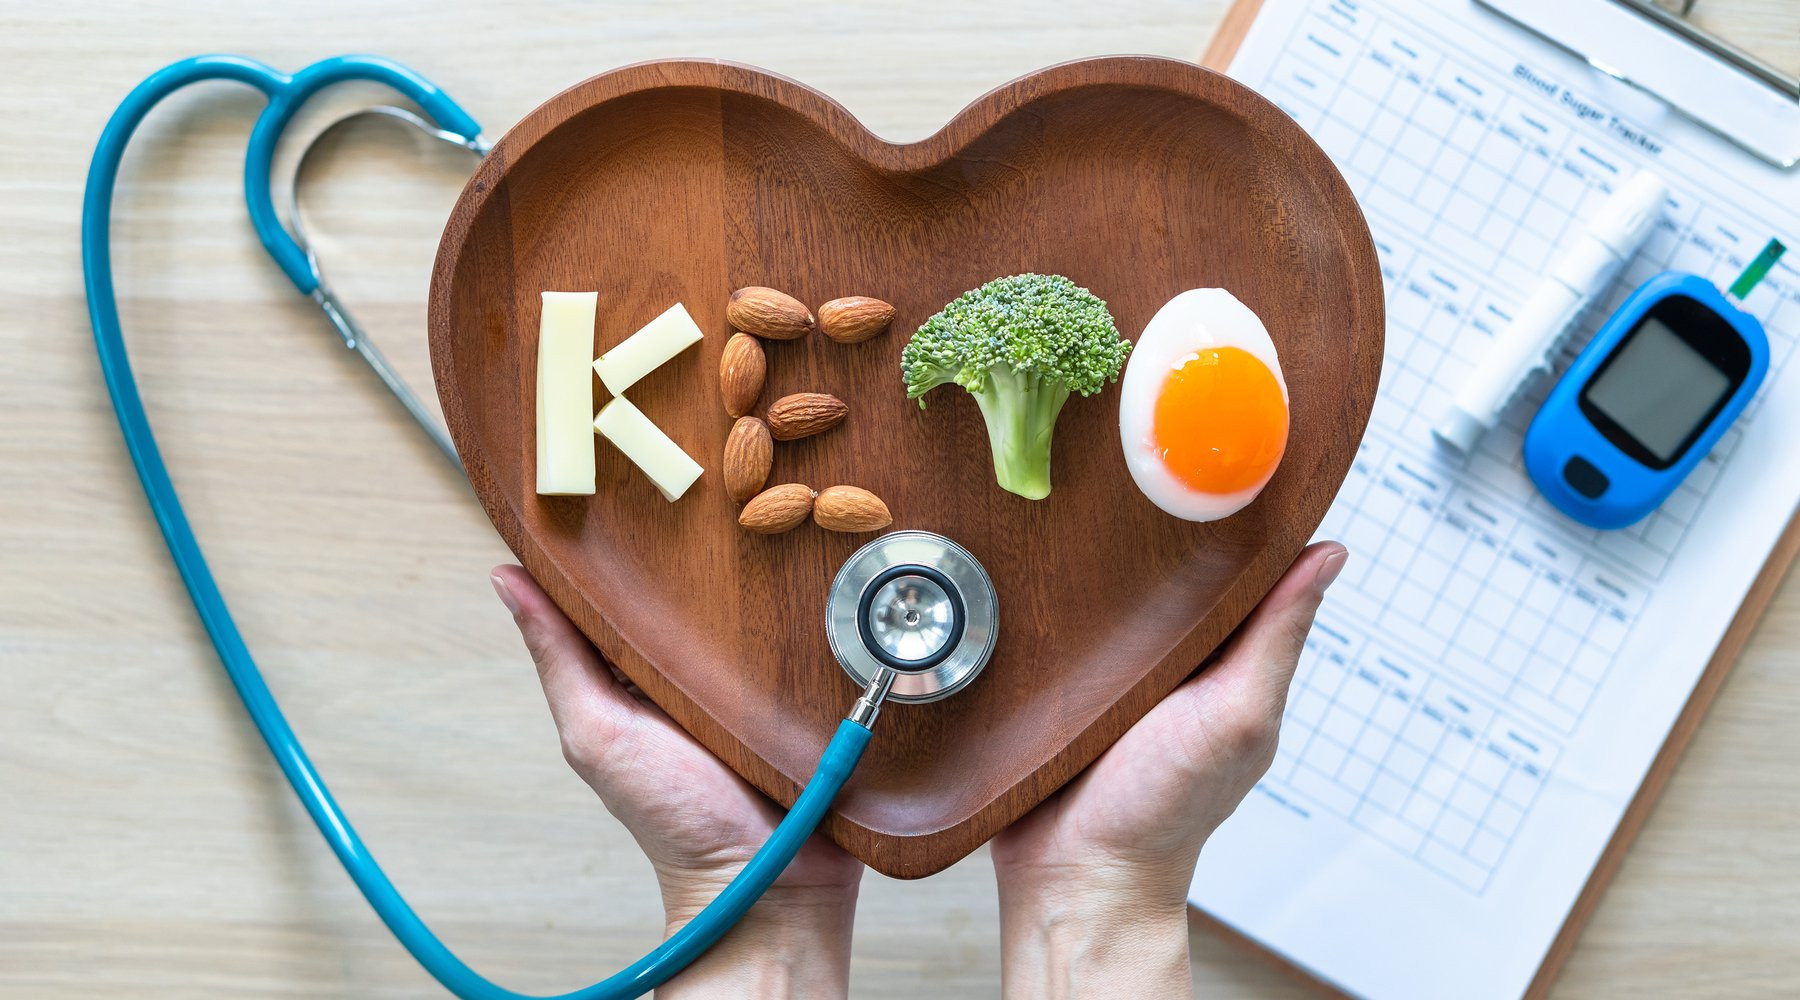 Keto Diet Heart Health
 Why Cardiologists Don’t Re mend Keto for Heart Health